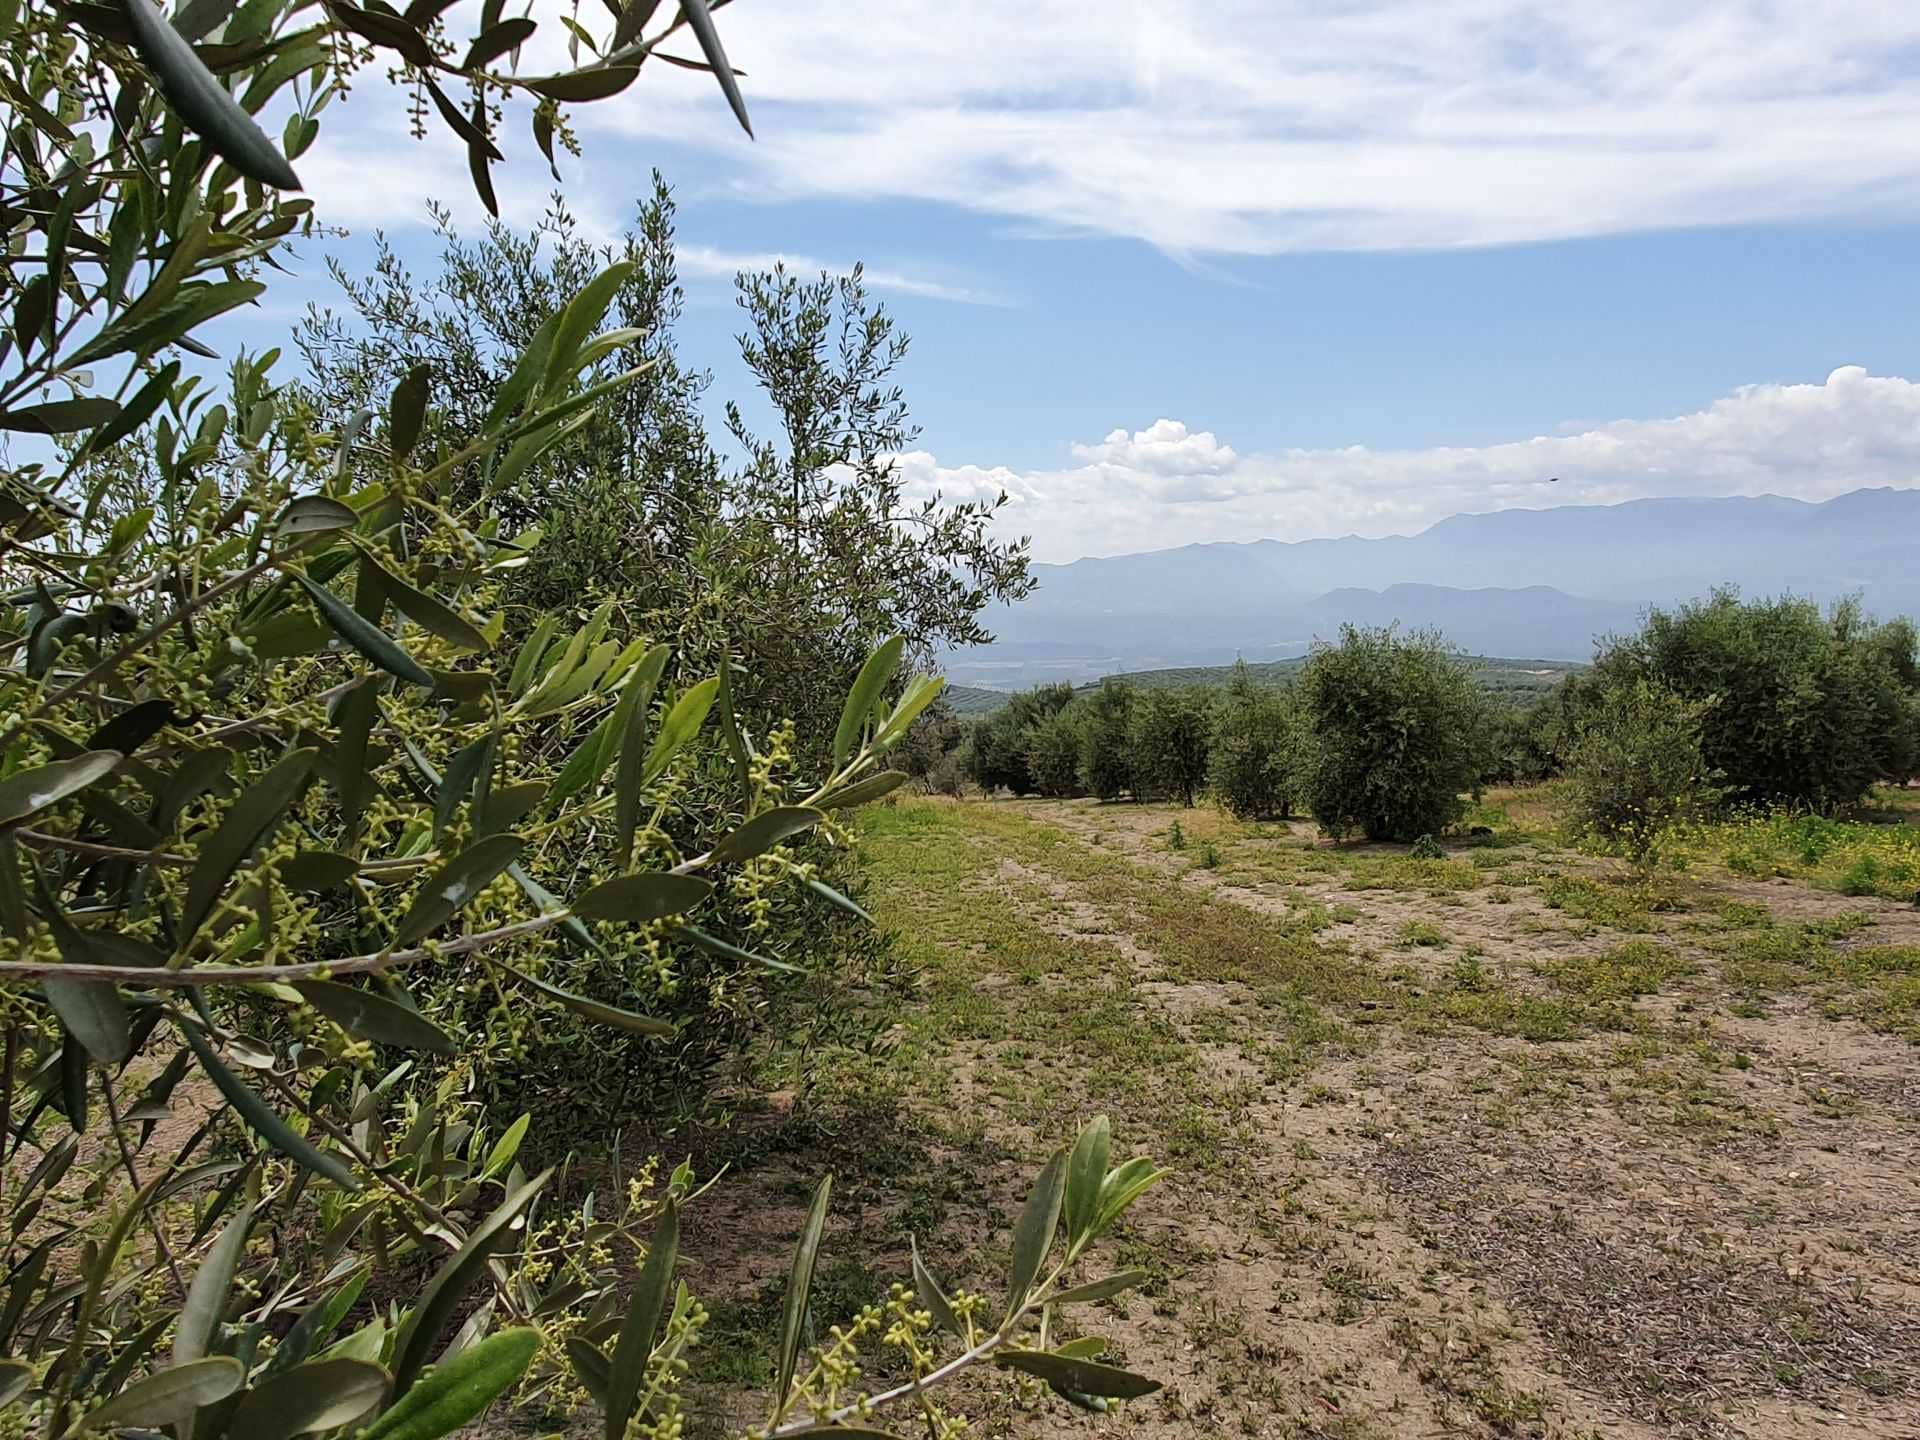 europe-competitions-the-best-olive-oils-andalusian-producers-overcome-obstacles-to-triumph-at-2021-nyiooc-olive-oil-times